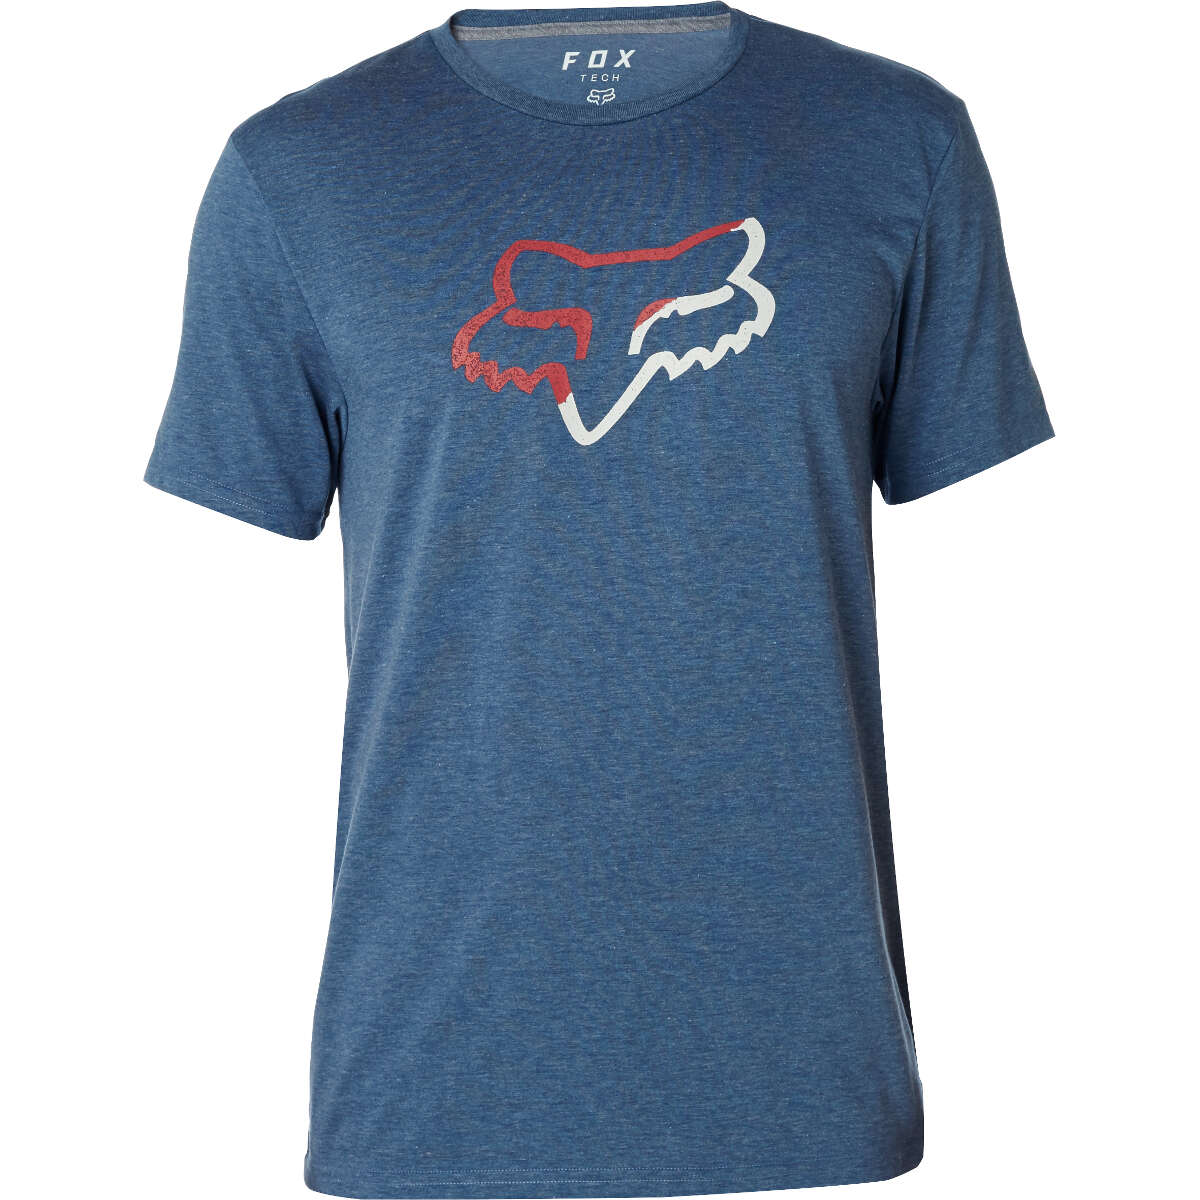 Fox Tech T-Shirt Planned Out Heather Navy